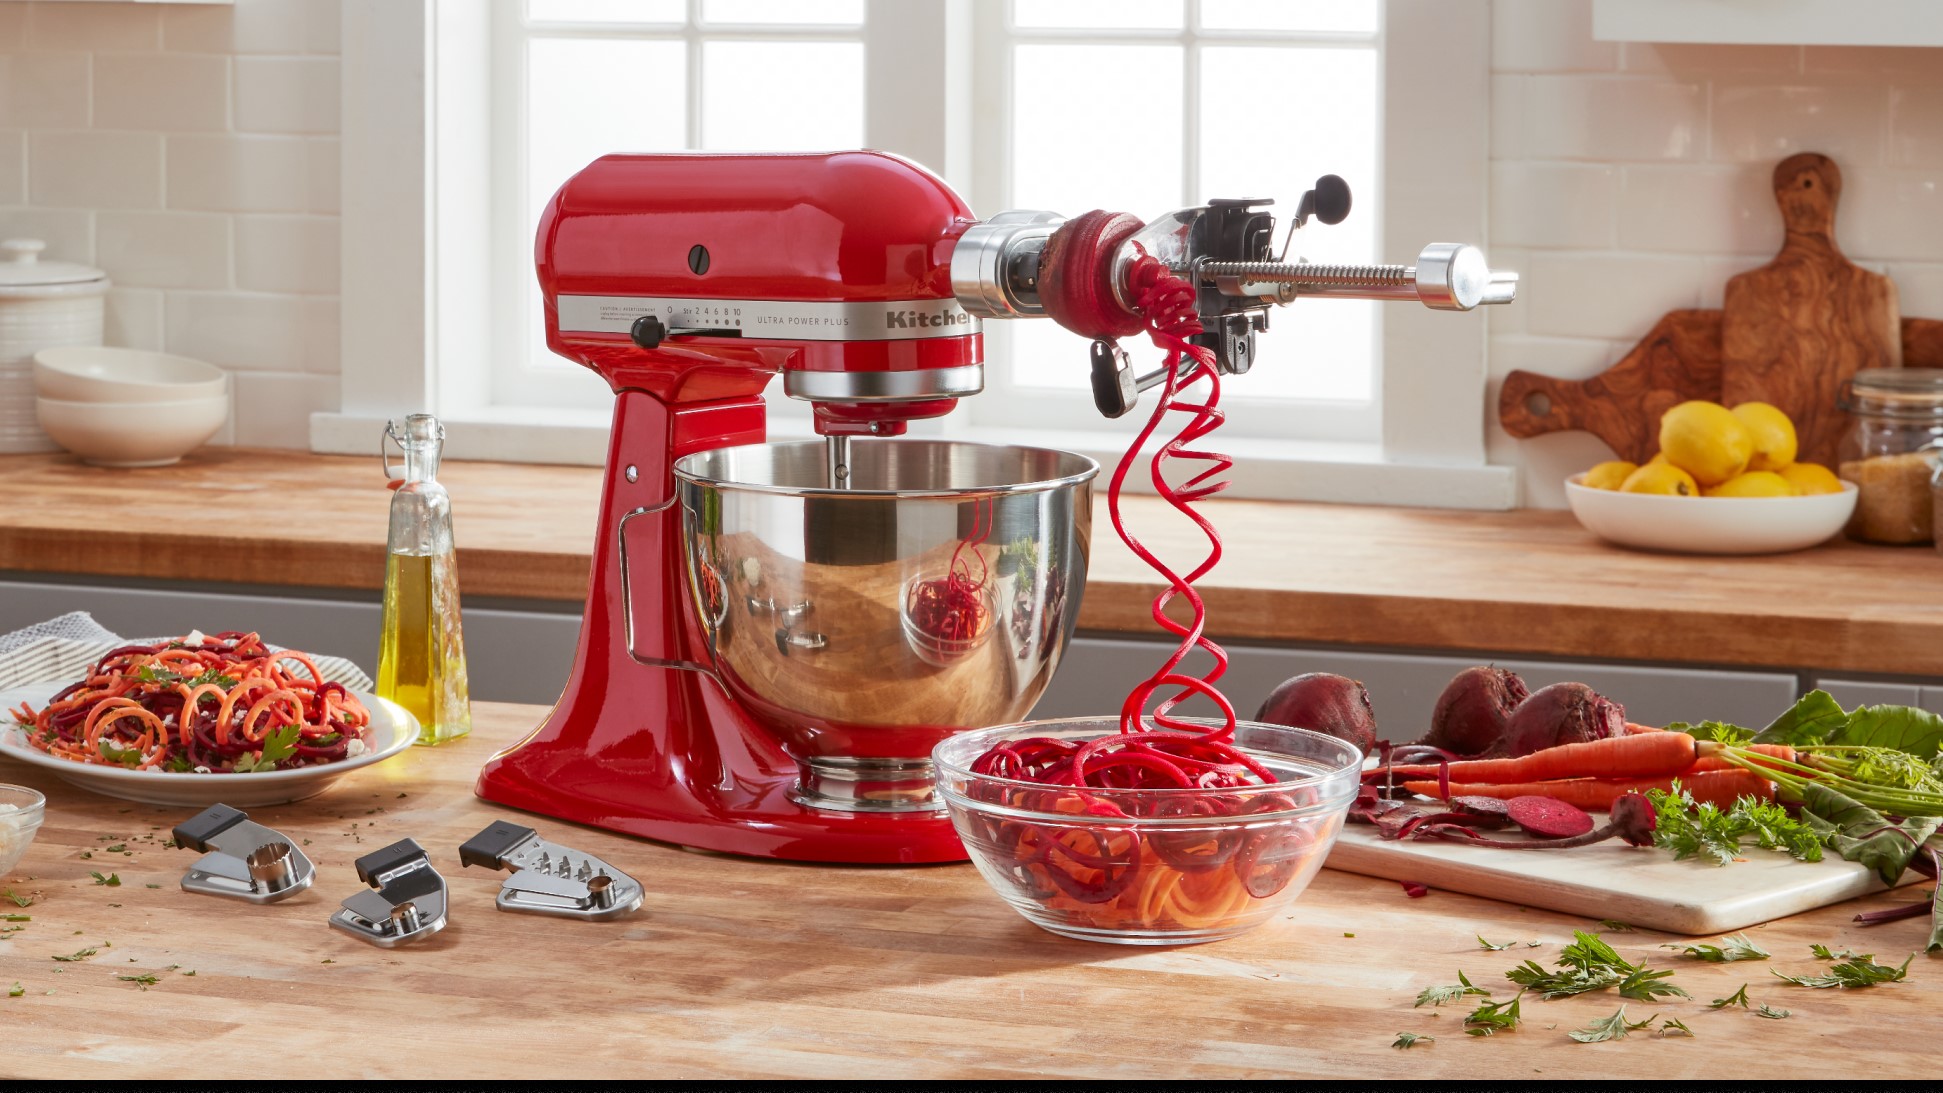 What Is The Warranty On A Kitchenaid Mixer